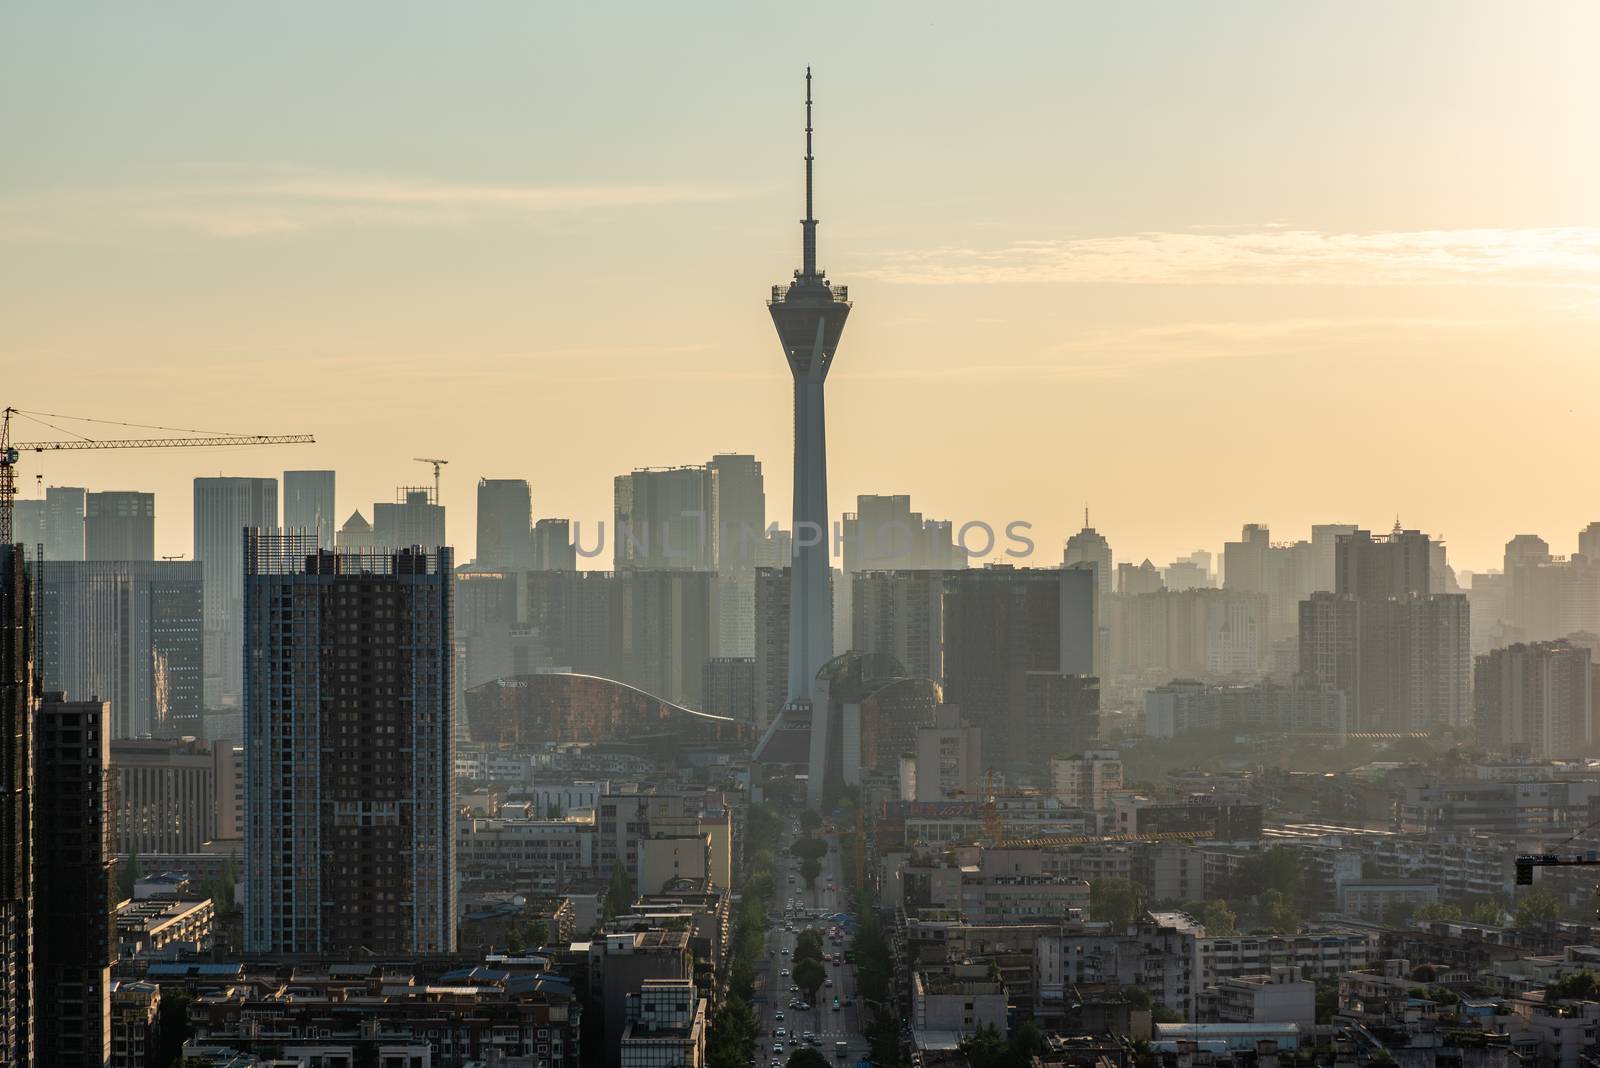 Chengdu, Sichuan province, China - June 18, 2020 : 339 TV tower and city skyline aerial view in late afternoon